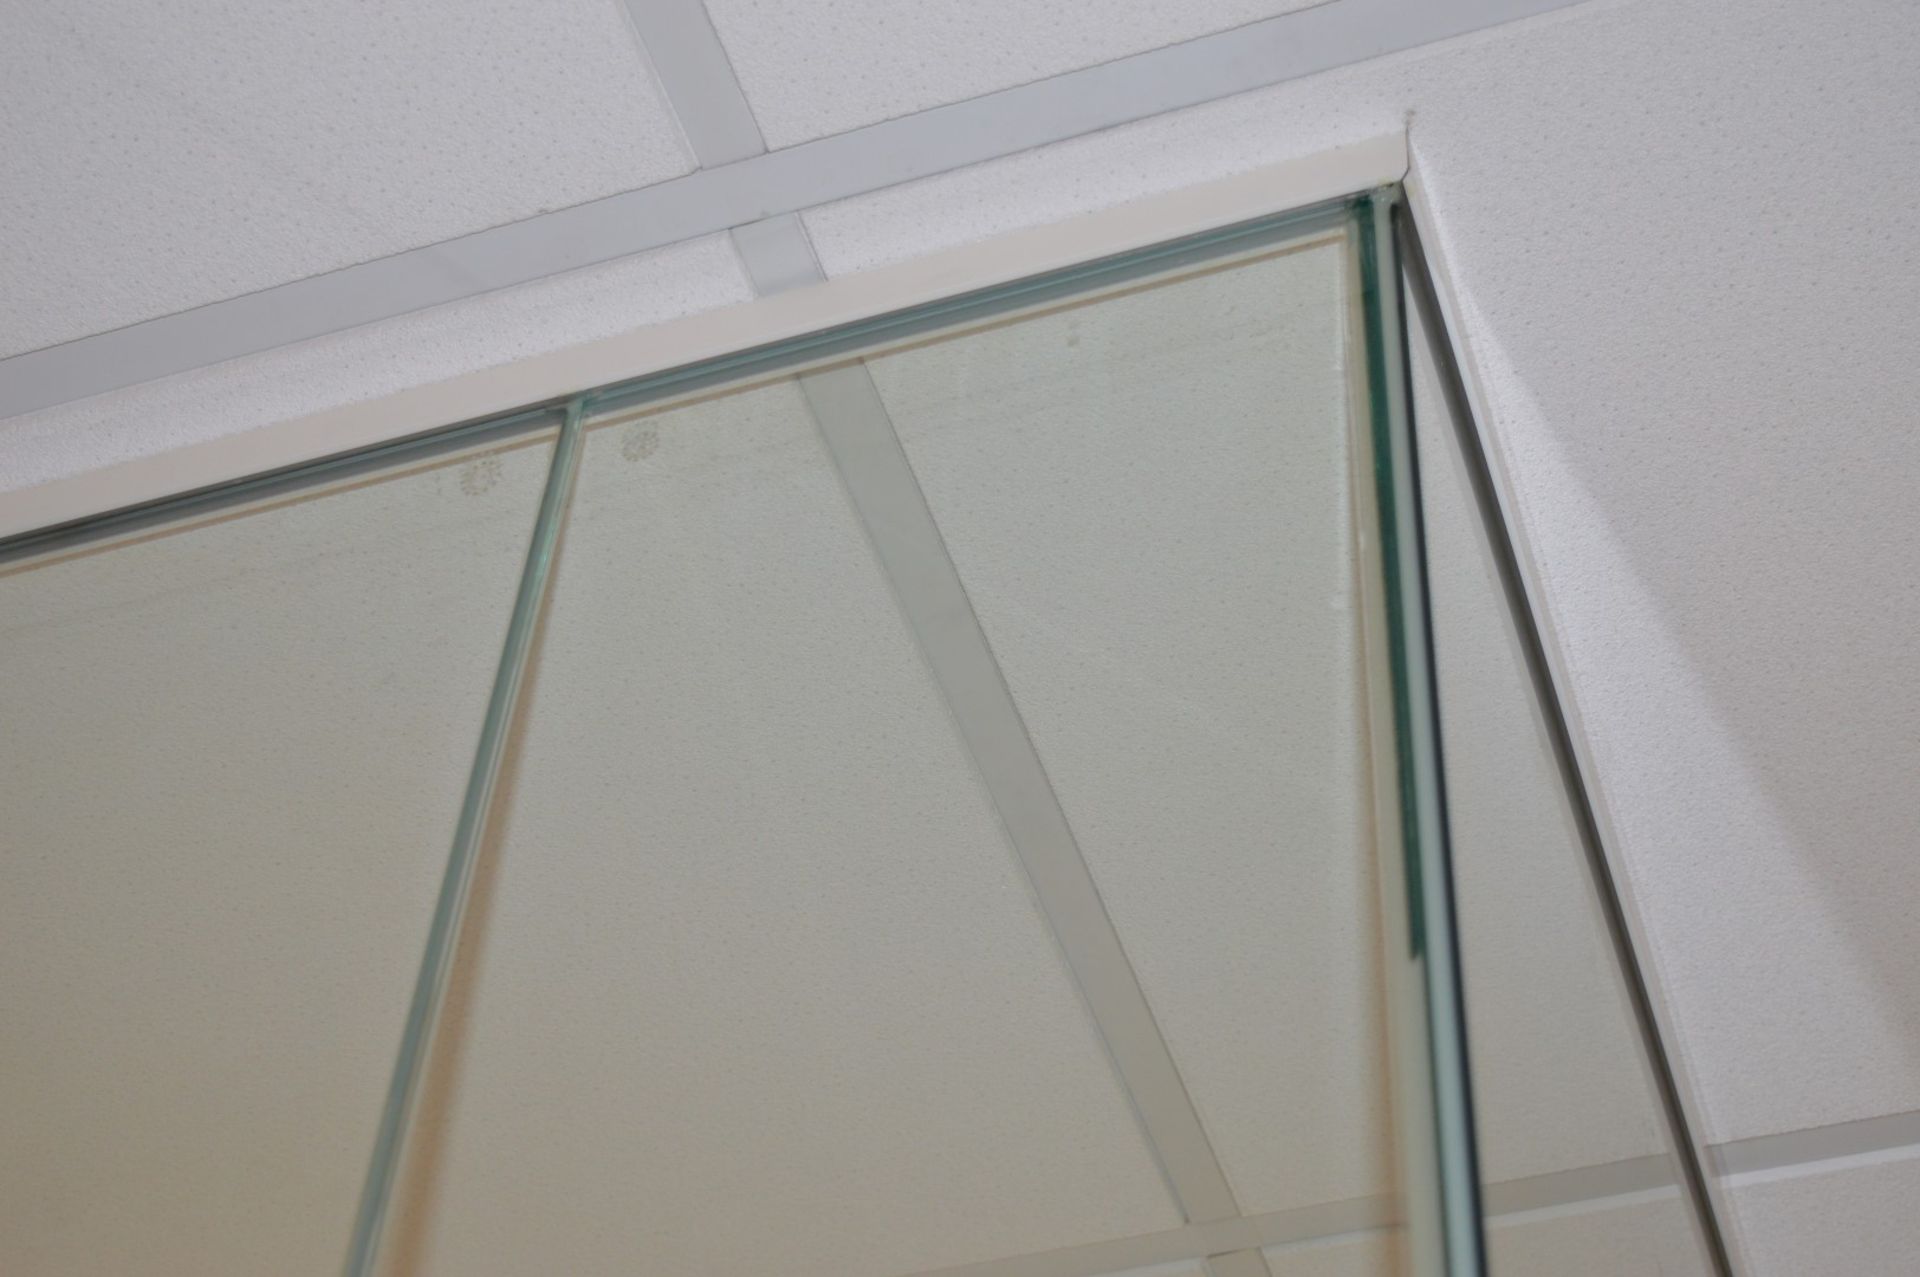 1 x Frameless Glass Partition Corner Office - Perfect For Creating a Contemporary Office Space in - Image 12 of 12